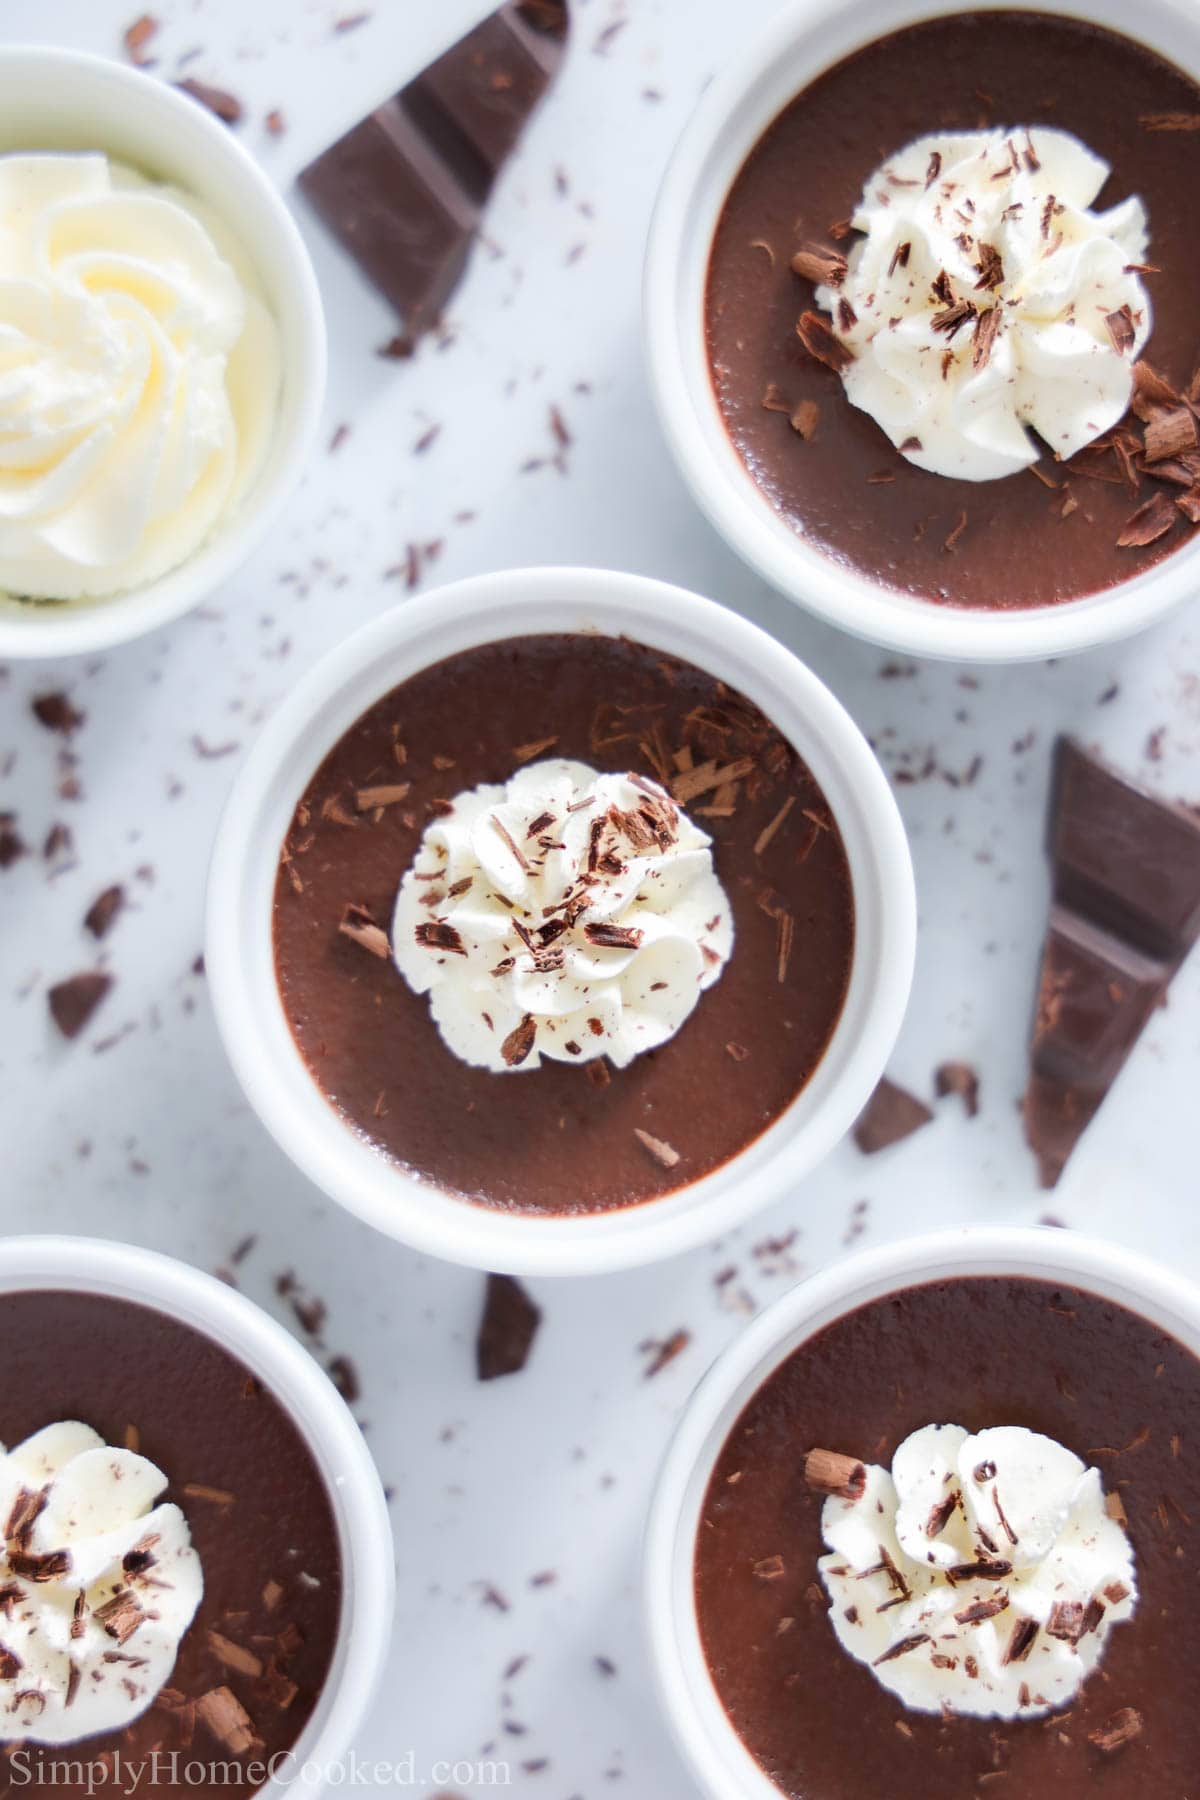 Chocolate Pot De Creme topped with whipped cream and chocolate shavings